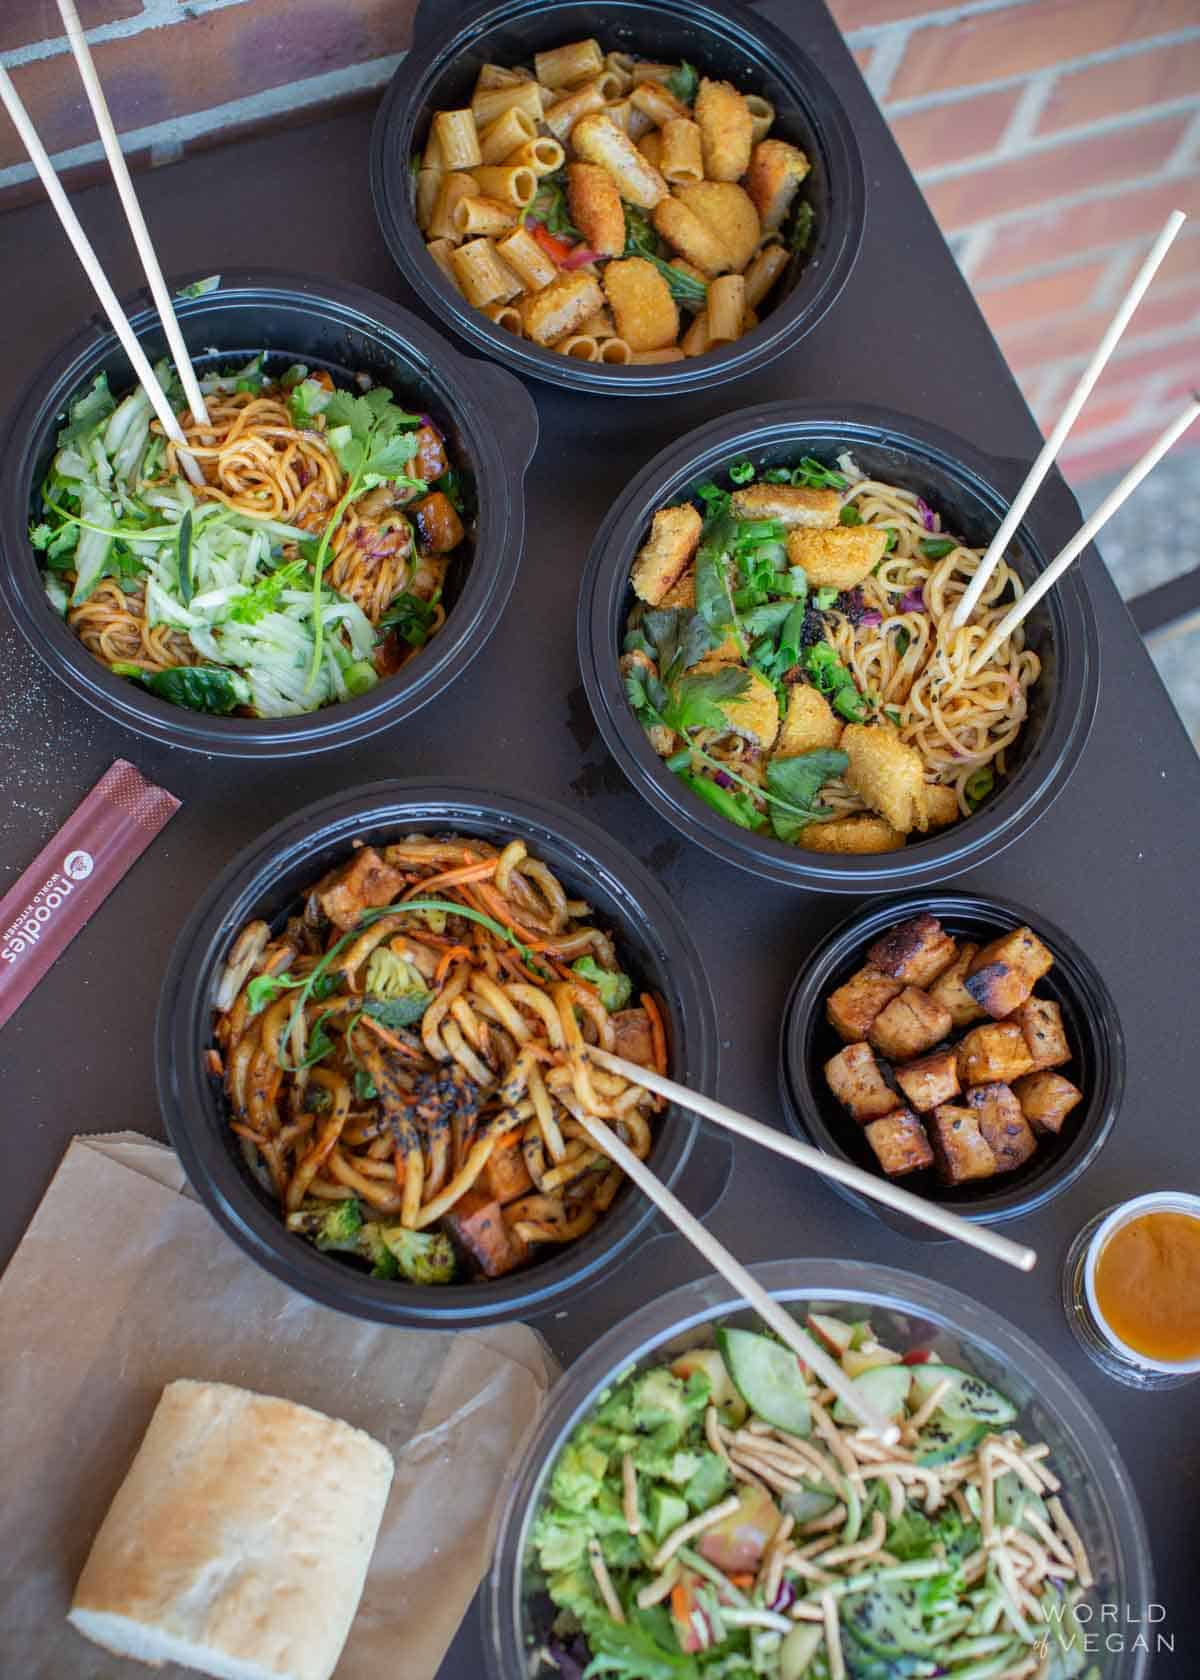 Bowls of vegan noodle and tofu options at Noodles and company